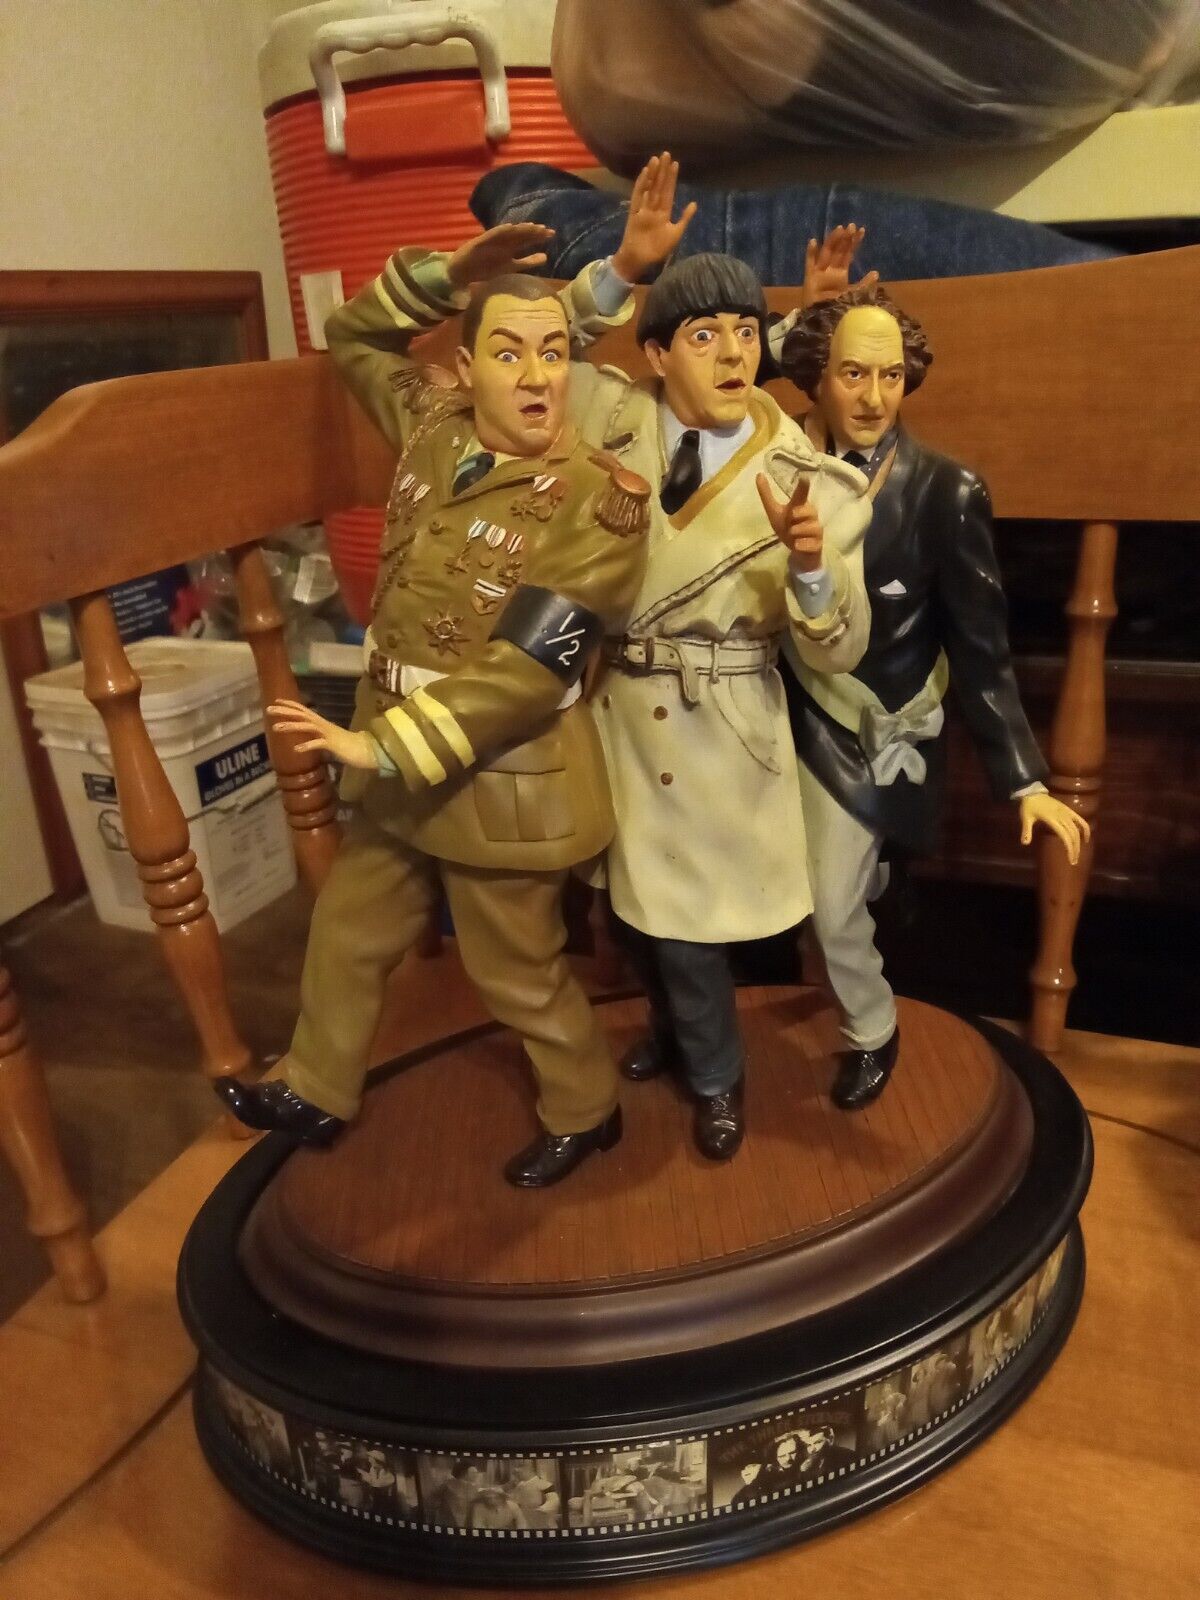 The Franklin Mint The Three Stooges Sculpture